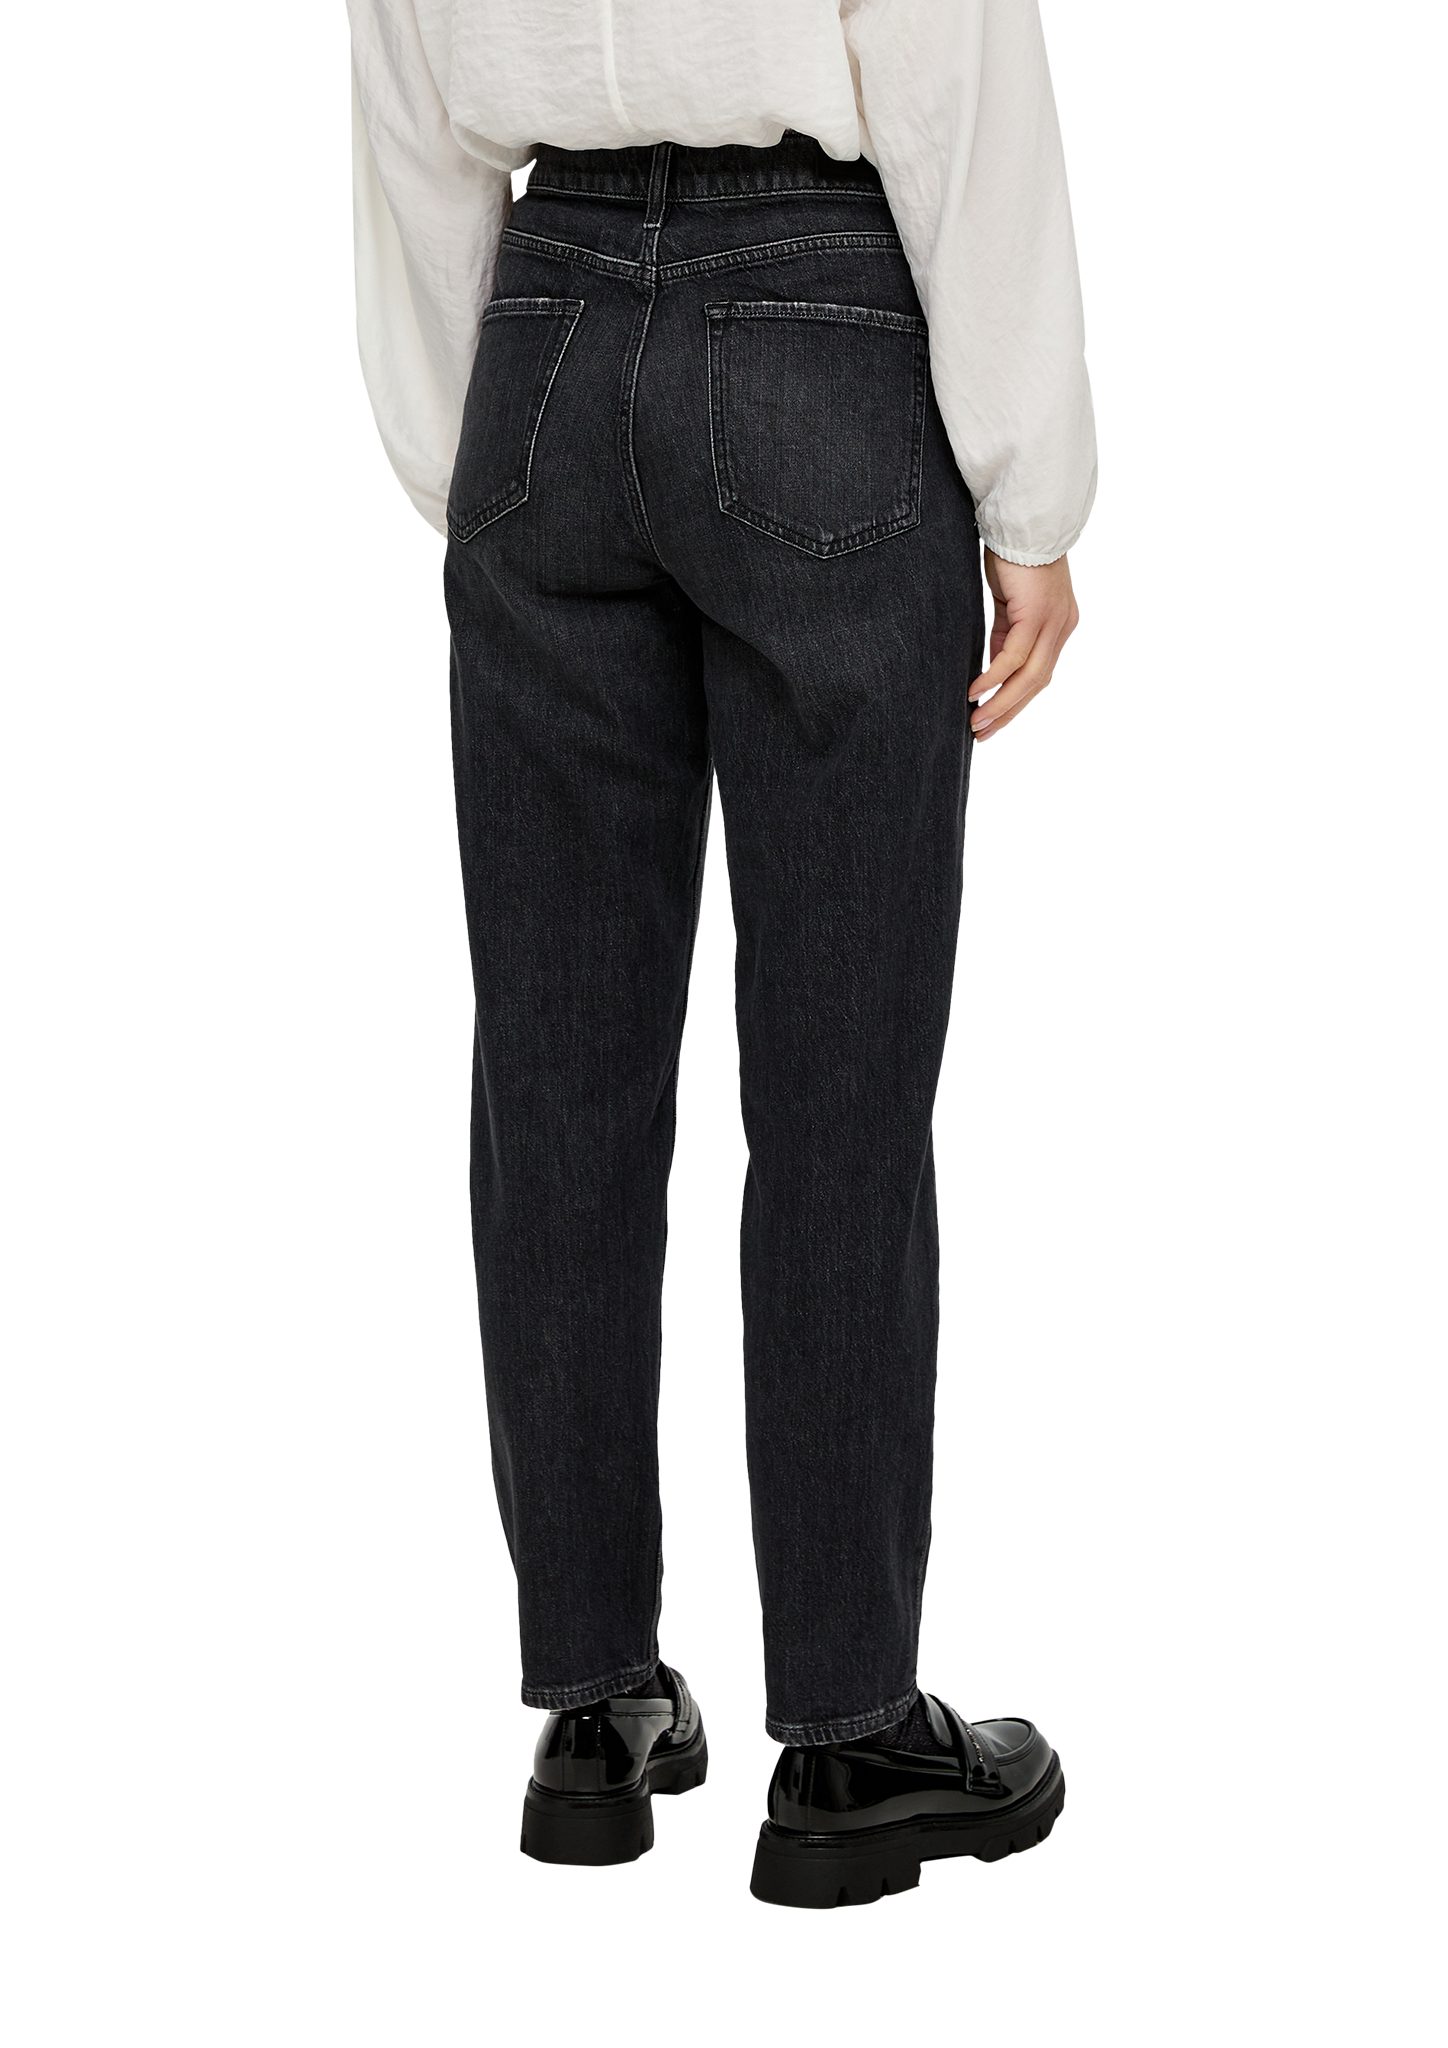 s.Oliver 7/8-Jeans Ankle-Jeans graphit Nieten / / Rise / Waschung, Fit High Leg Tapered Label-Patch, Regular